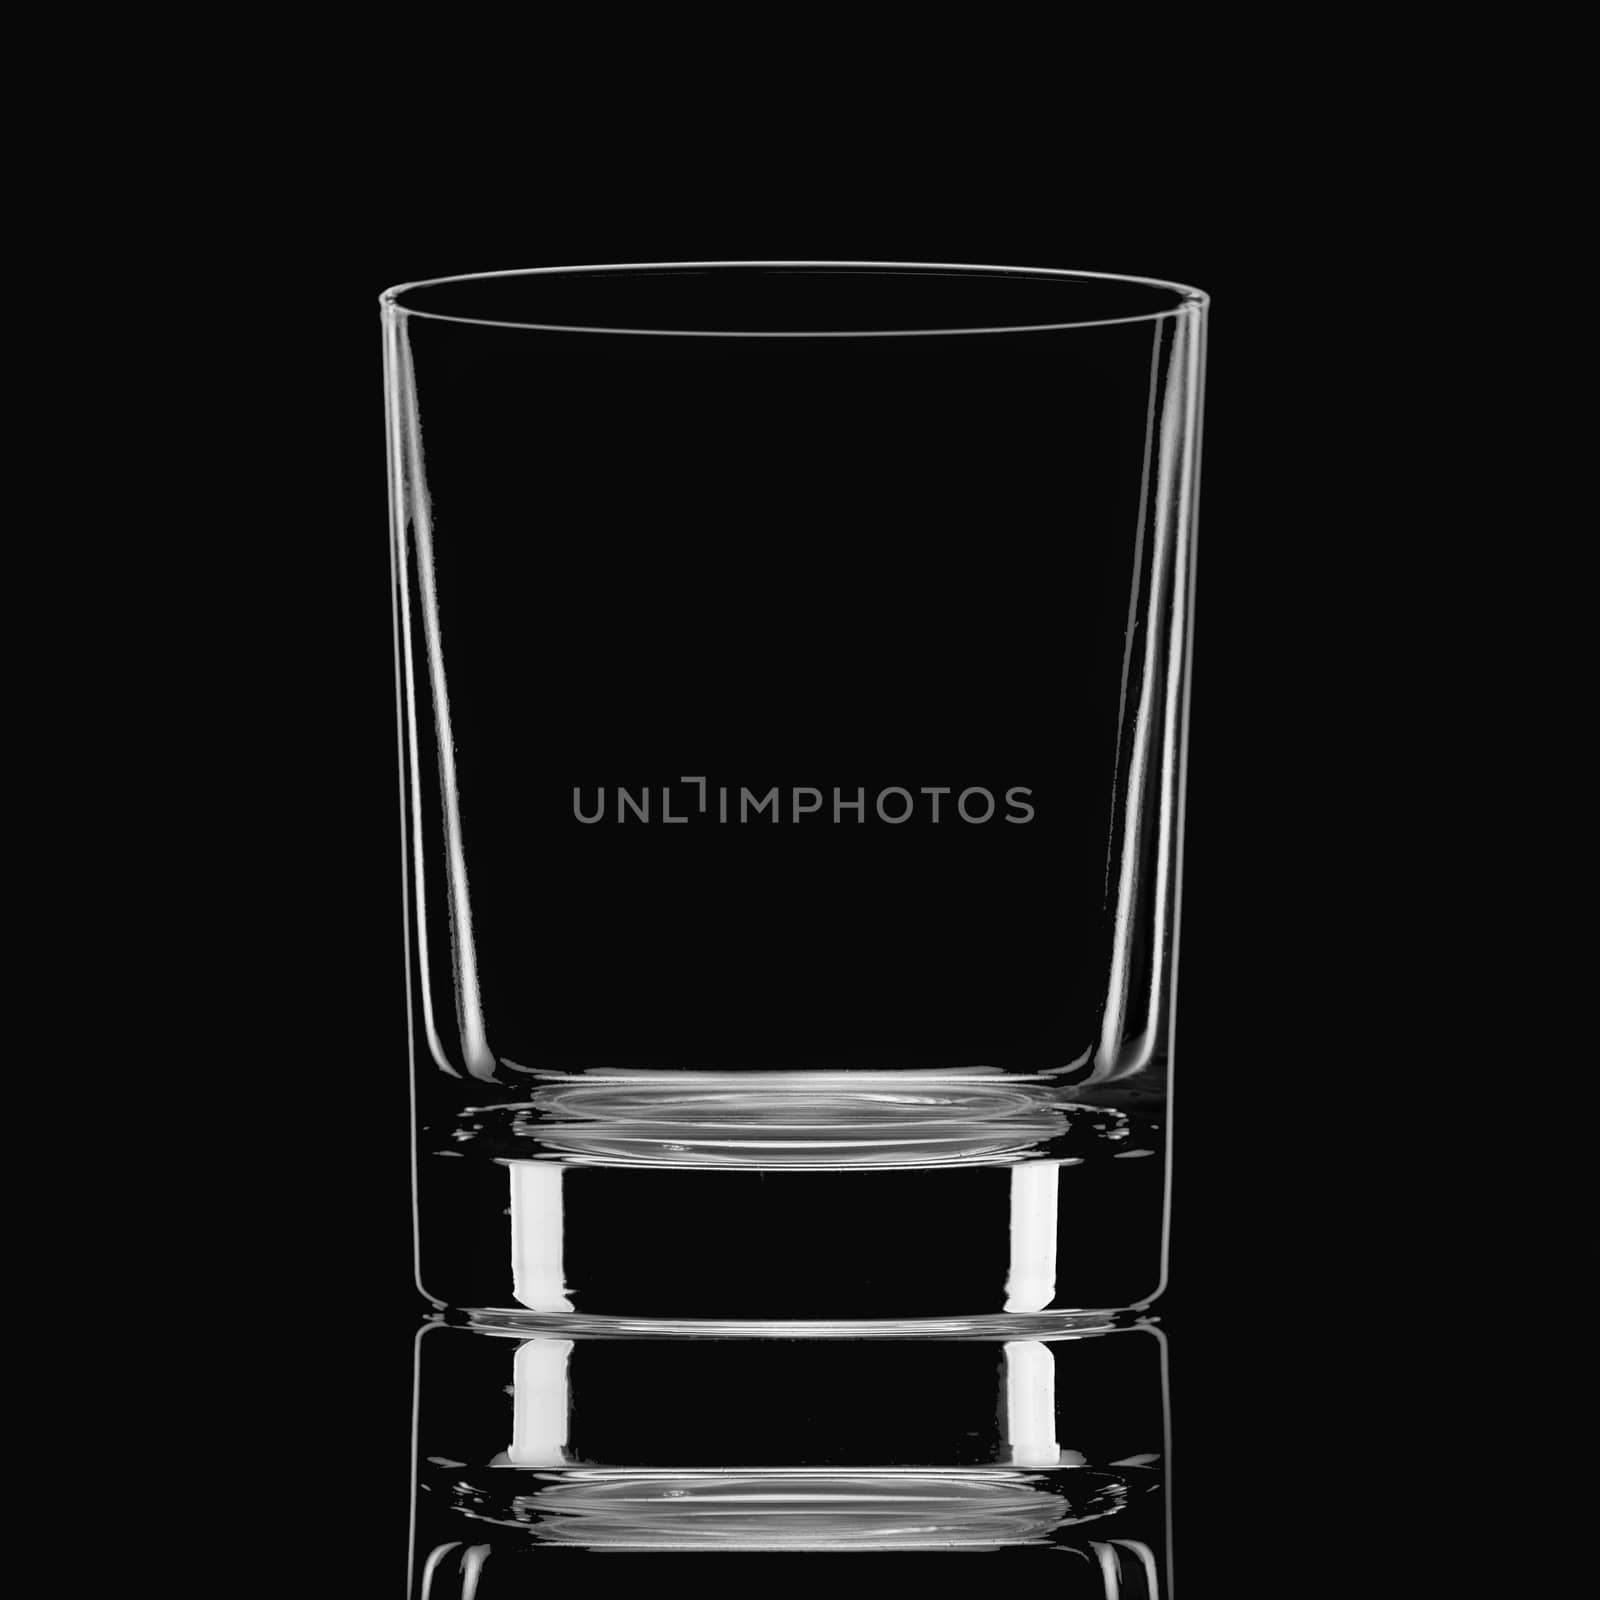 Empty glass isolated on a black background